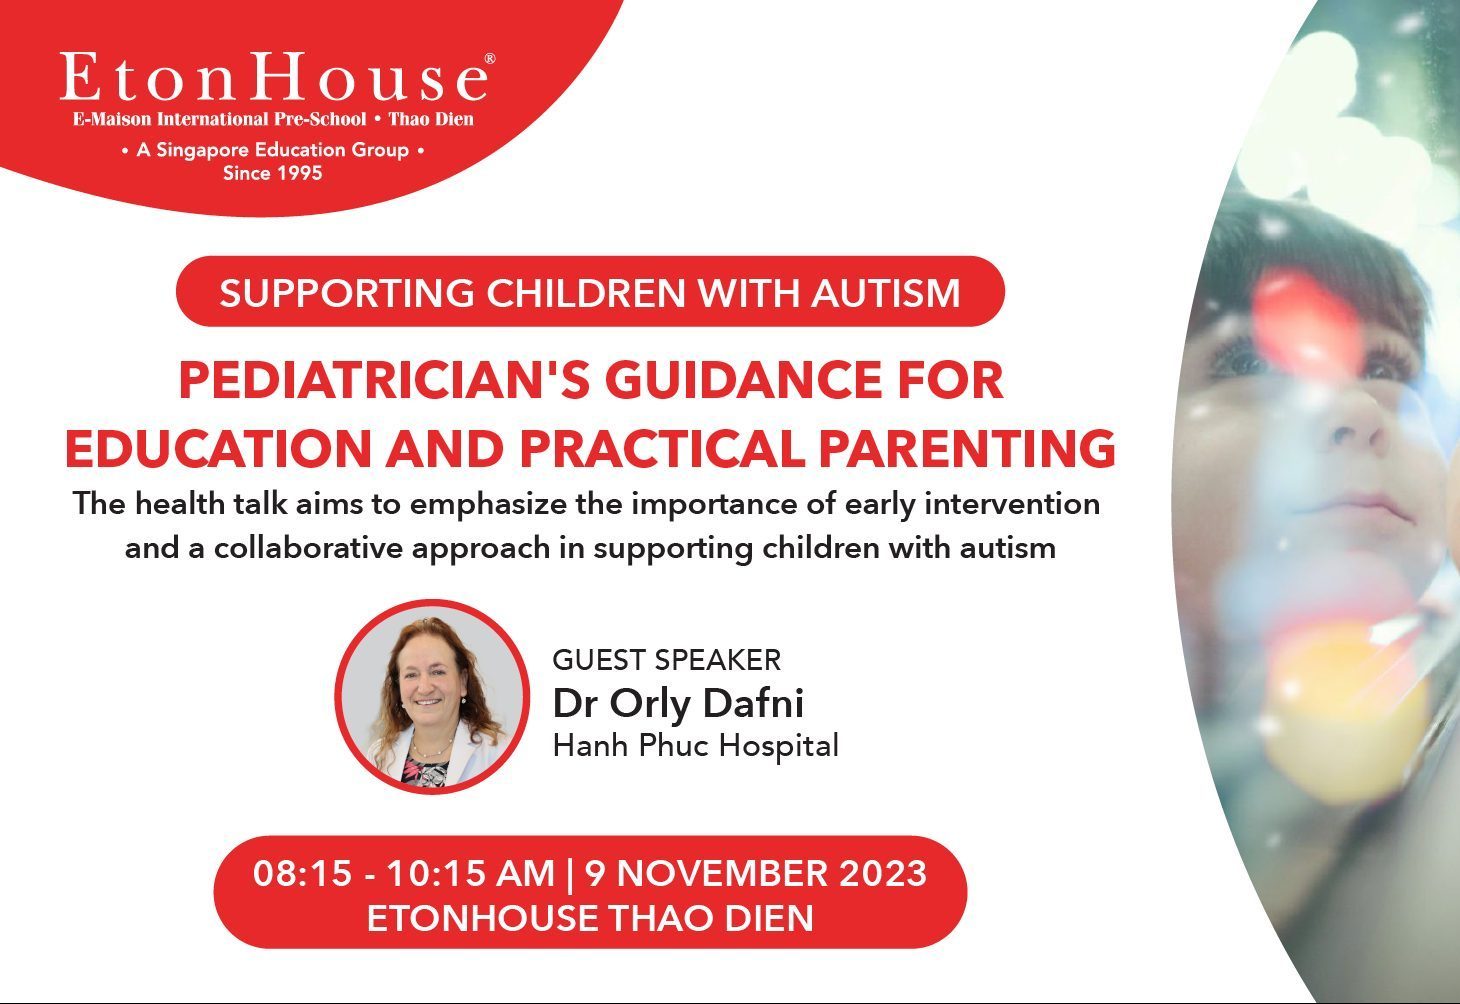 Seminar SUPPORTING CHILDREN WITH AUTISM: PEDIATRICIAN’S GUIDANCE FOR EDUCATION AND PRACTICAL PARENTING